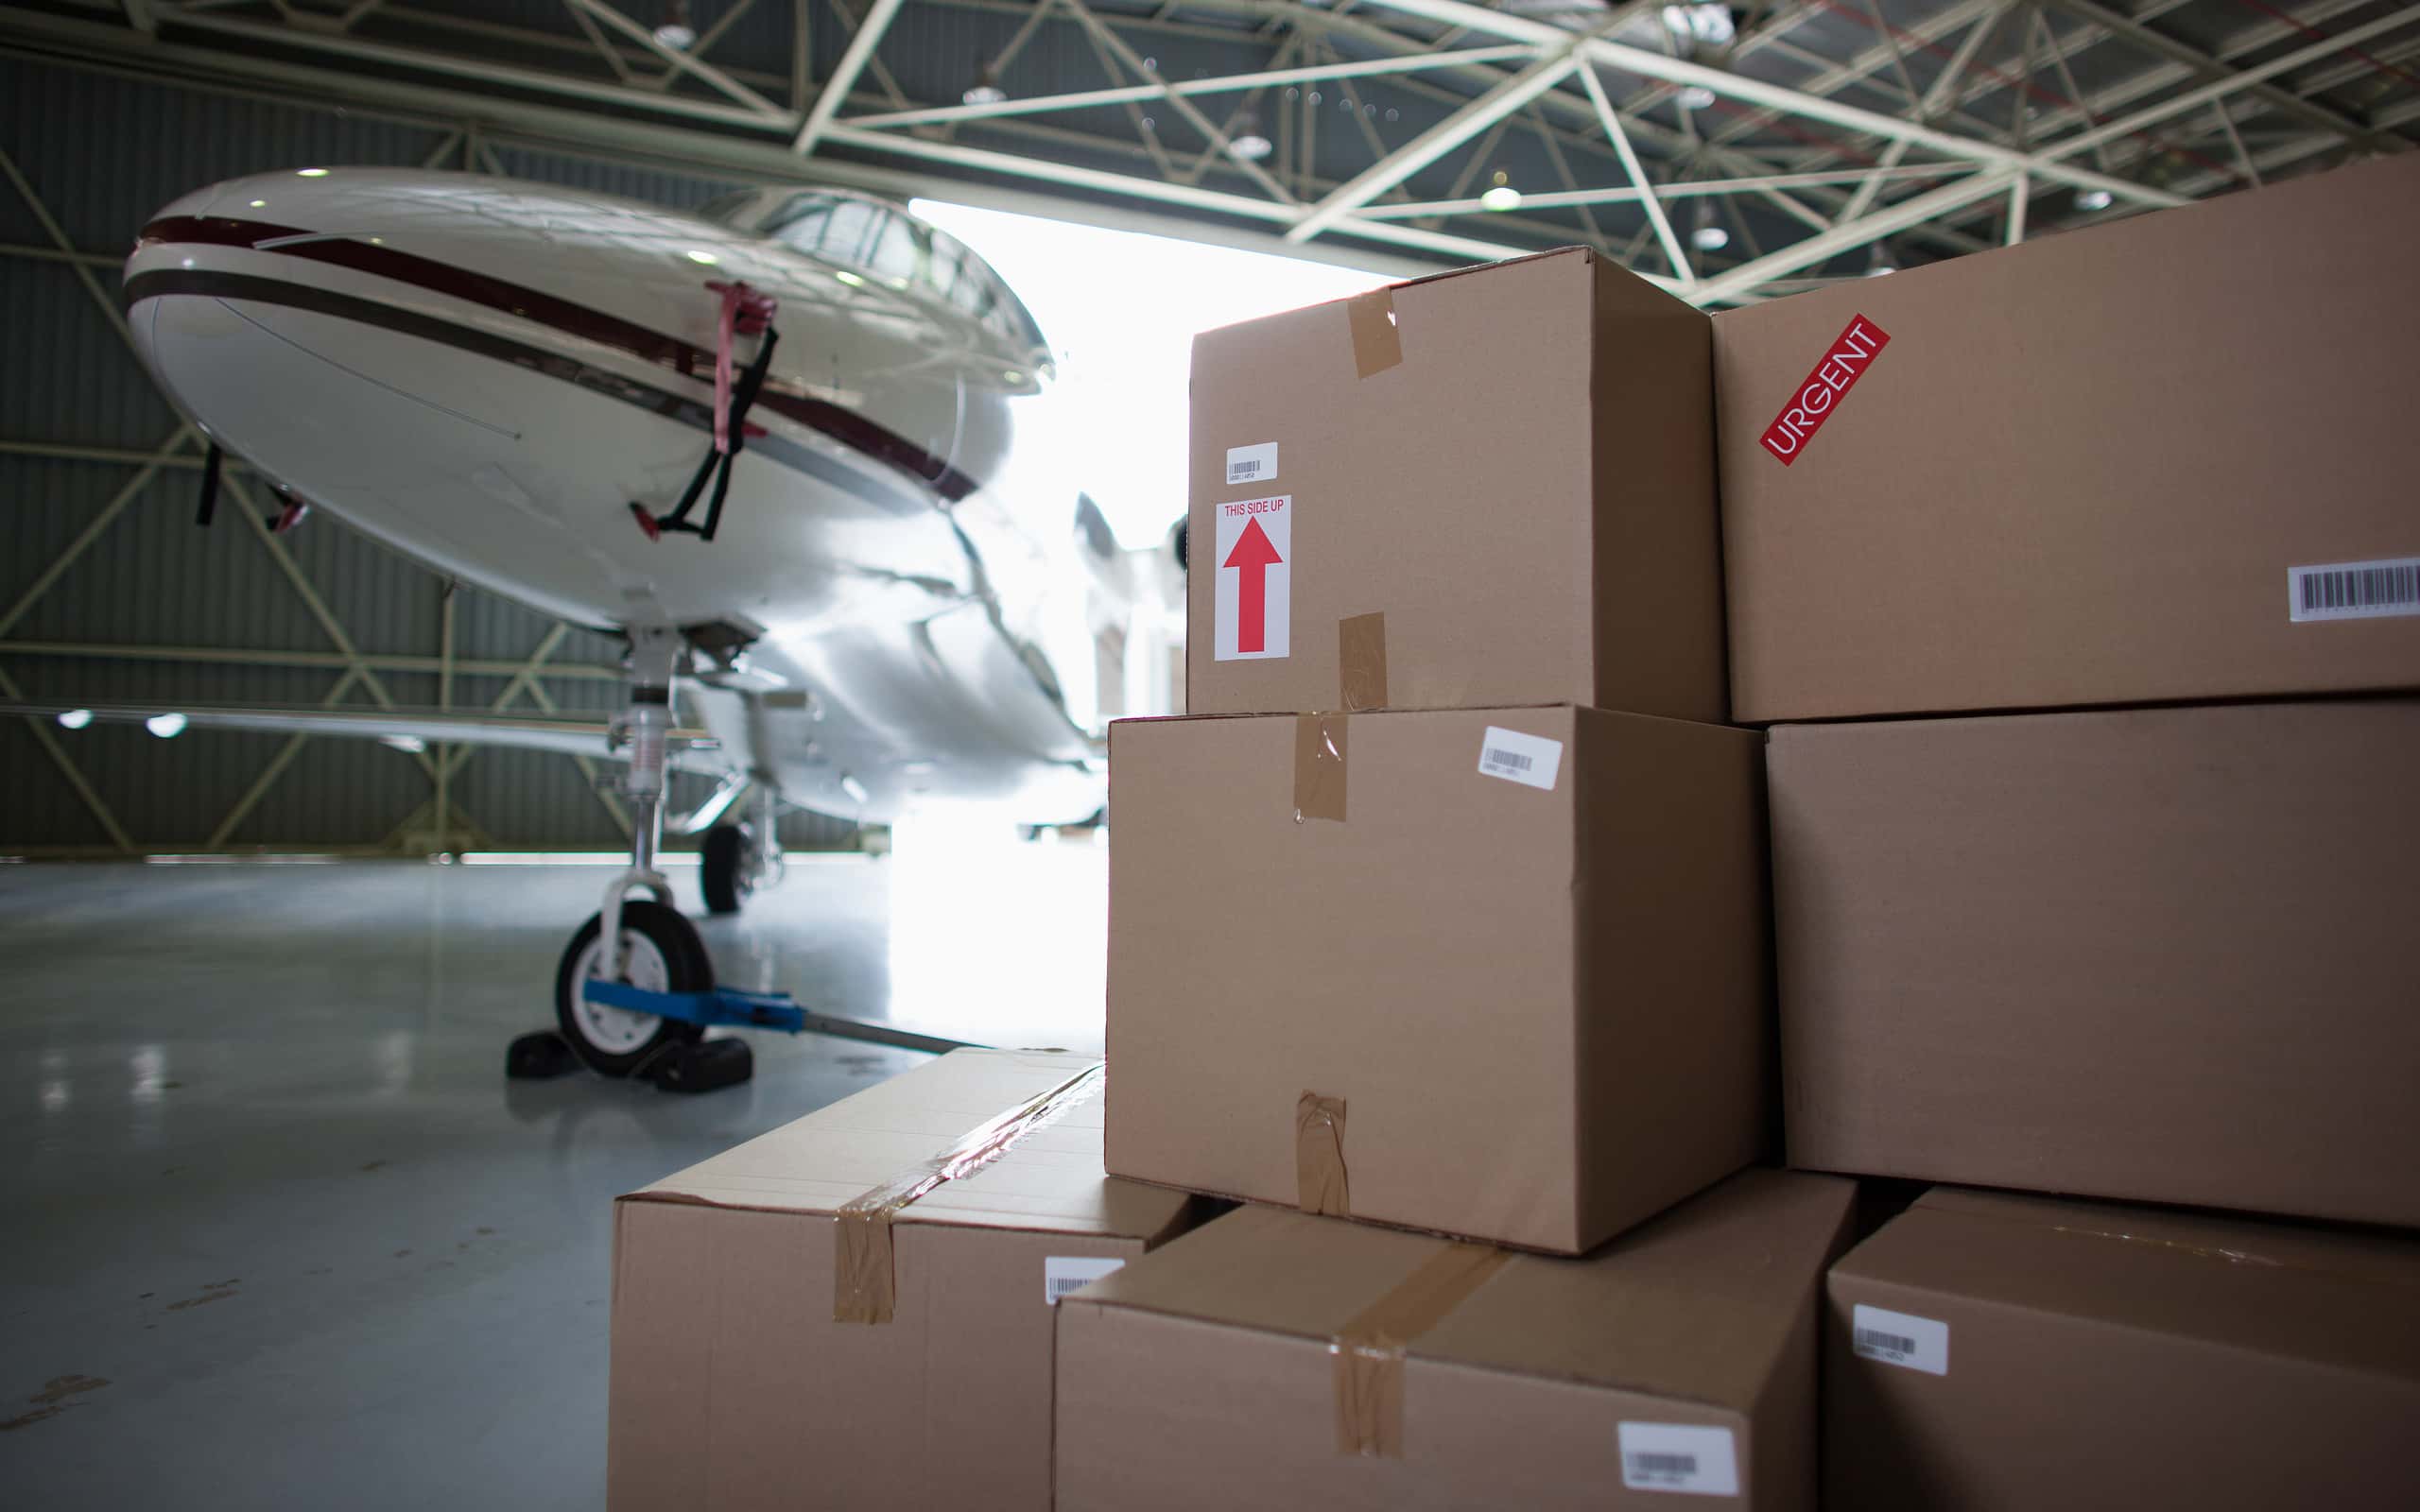 Airplane and boxes in hangar